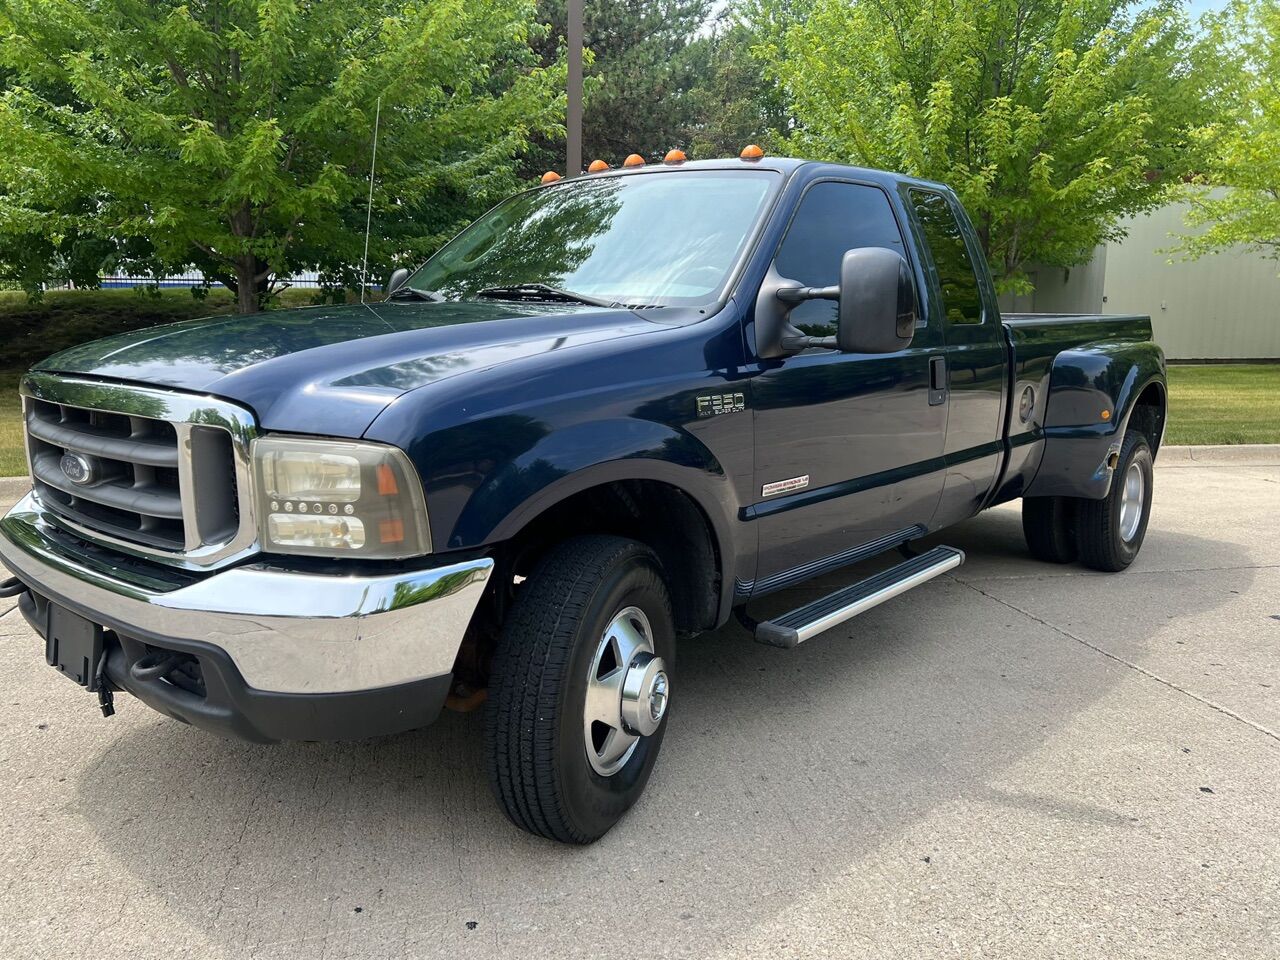 2004 Ford F-350 For Sale - Carsforsale.com®